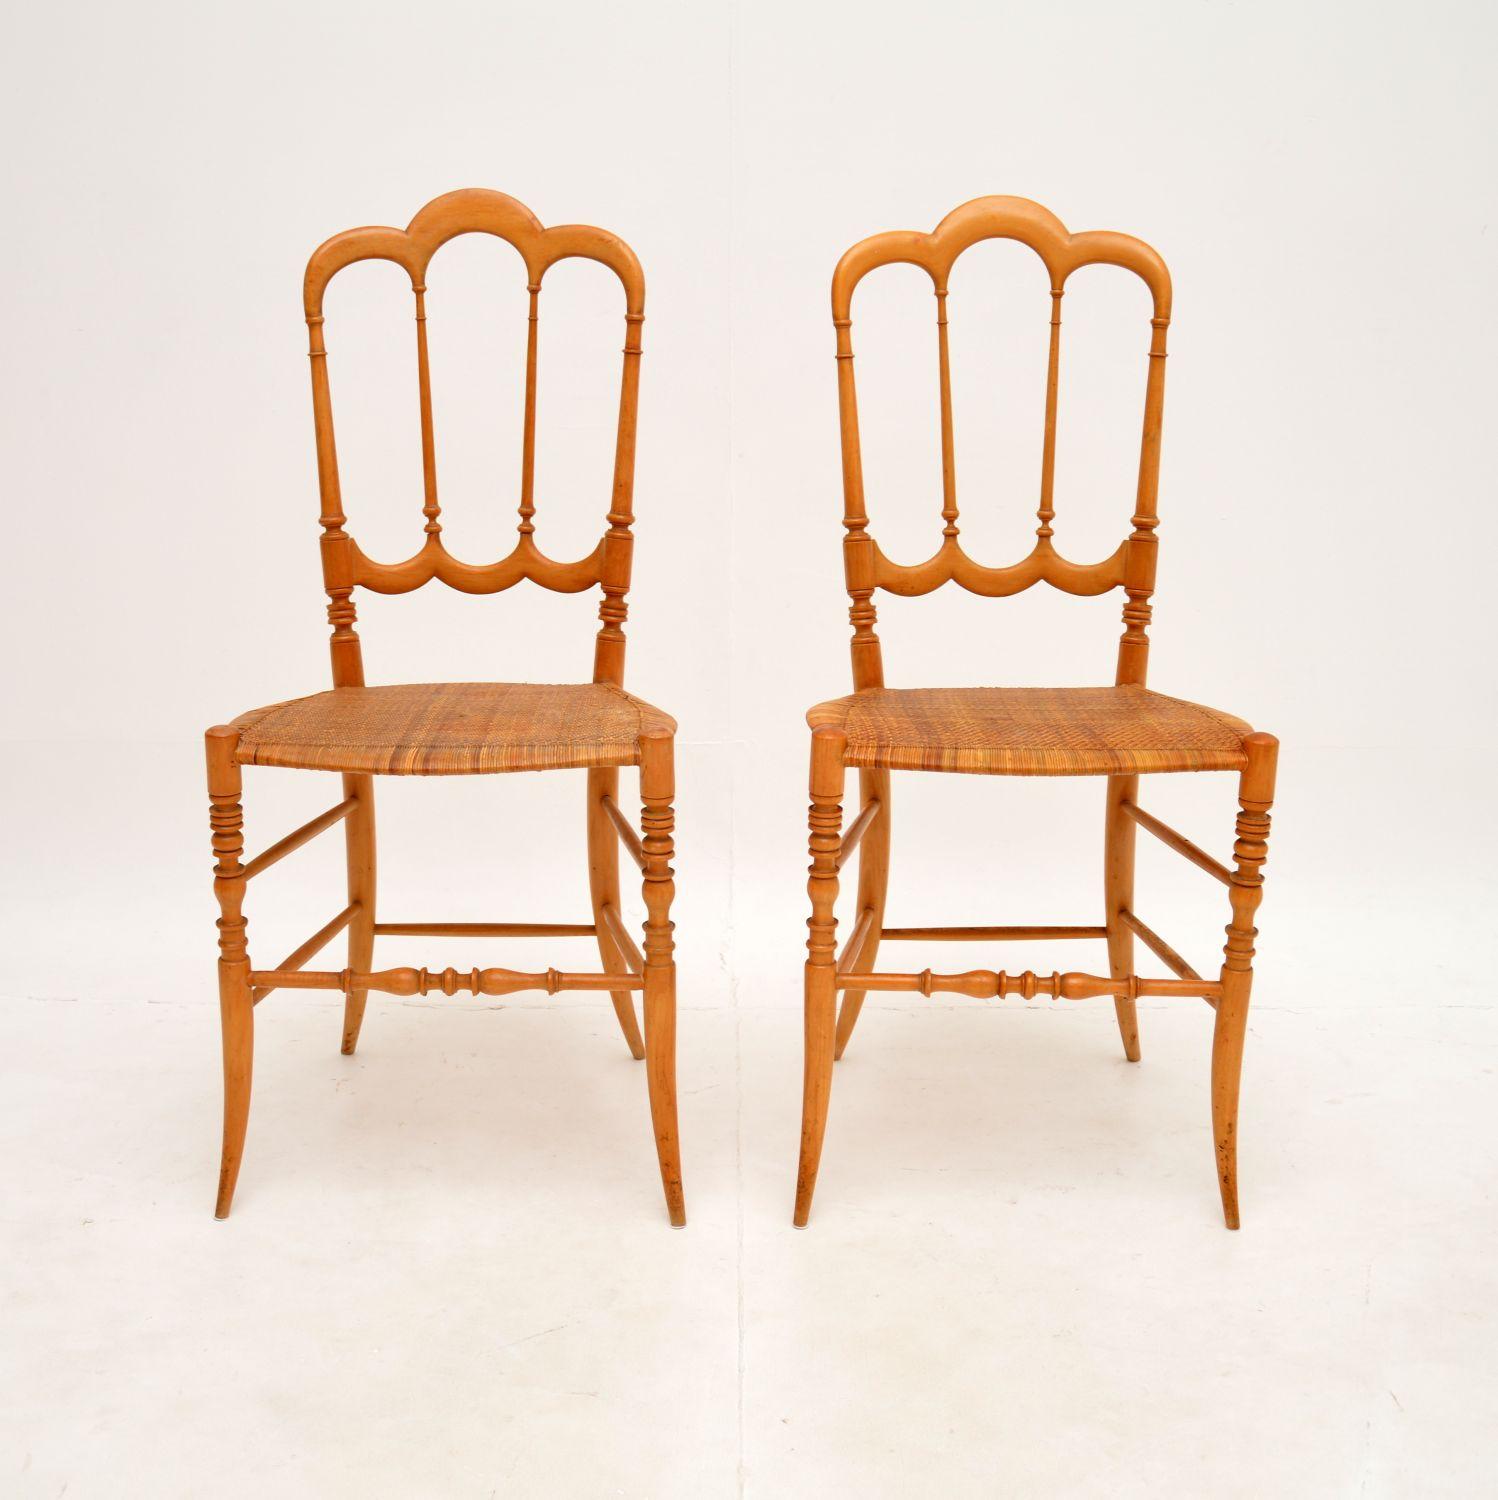 A stunning pair of vintage Italian ‘Tre Archi’ Chiavari chairs by Fratelli Levaggi. Each chair is stamped ‘made in Italy’ beneath the frames, they date from the 1960’s.

They are made from solid ligurian wood, with woven rattan seats. The design is